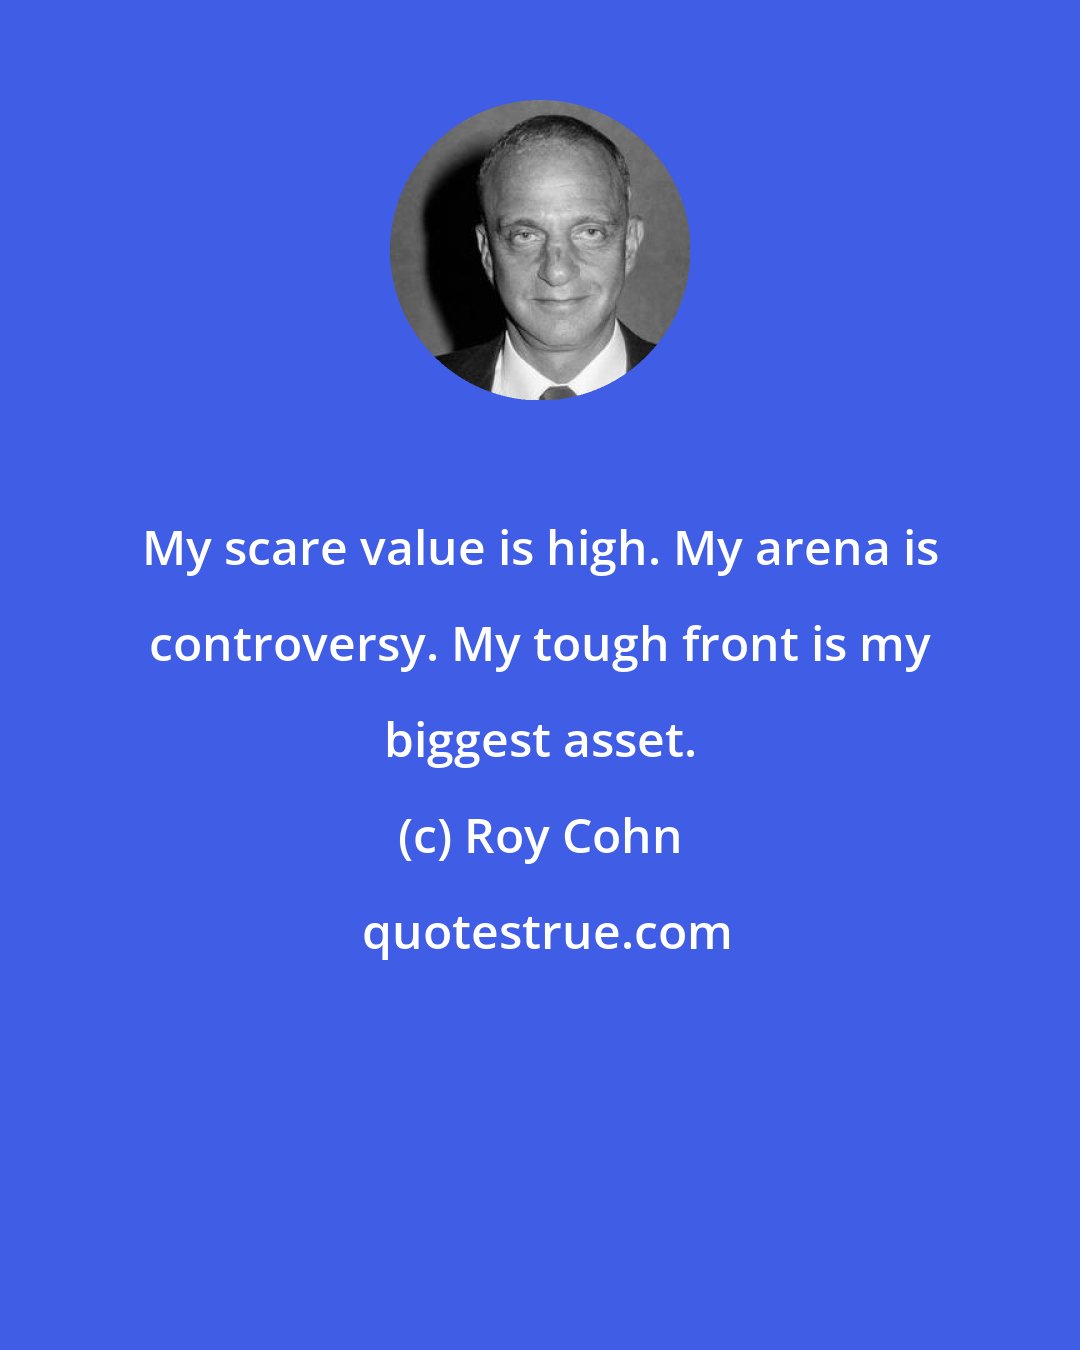 Roy Cohn: My scare value is high. My arena is controversy. My tough front is my biggest asset.